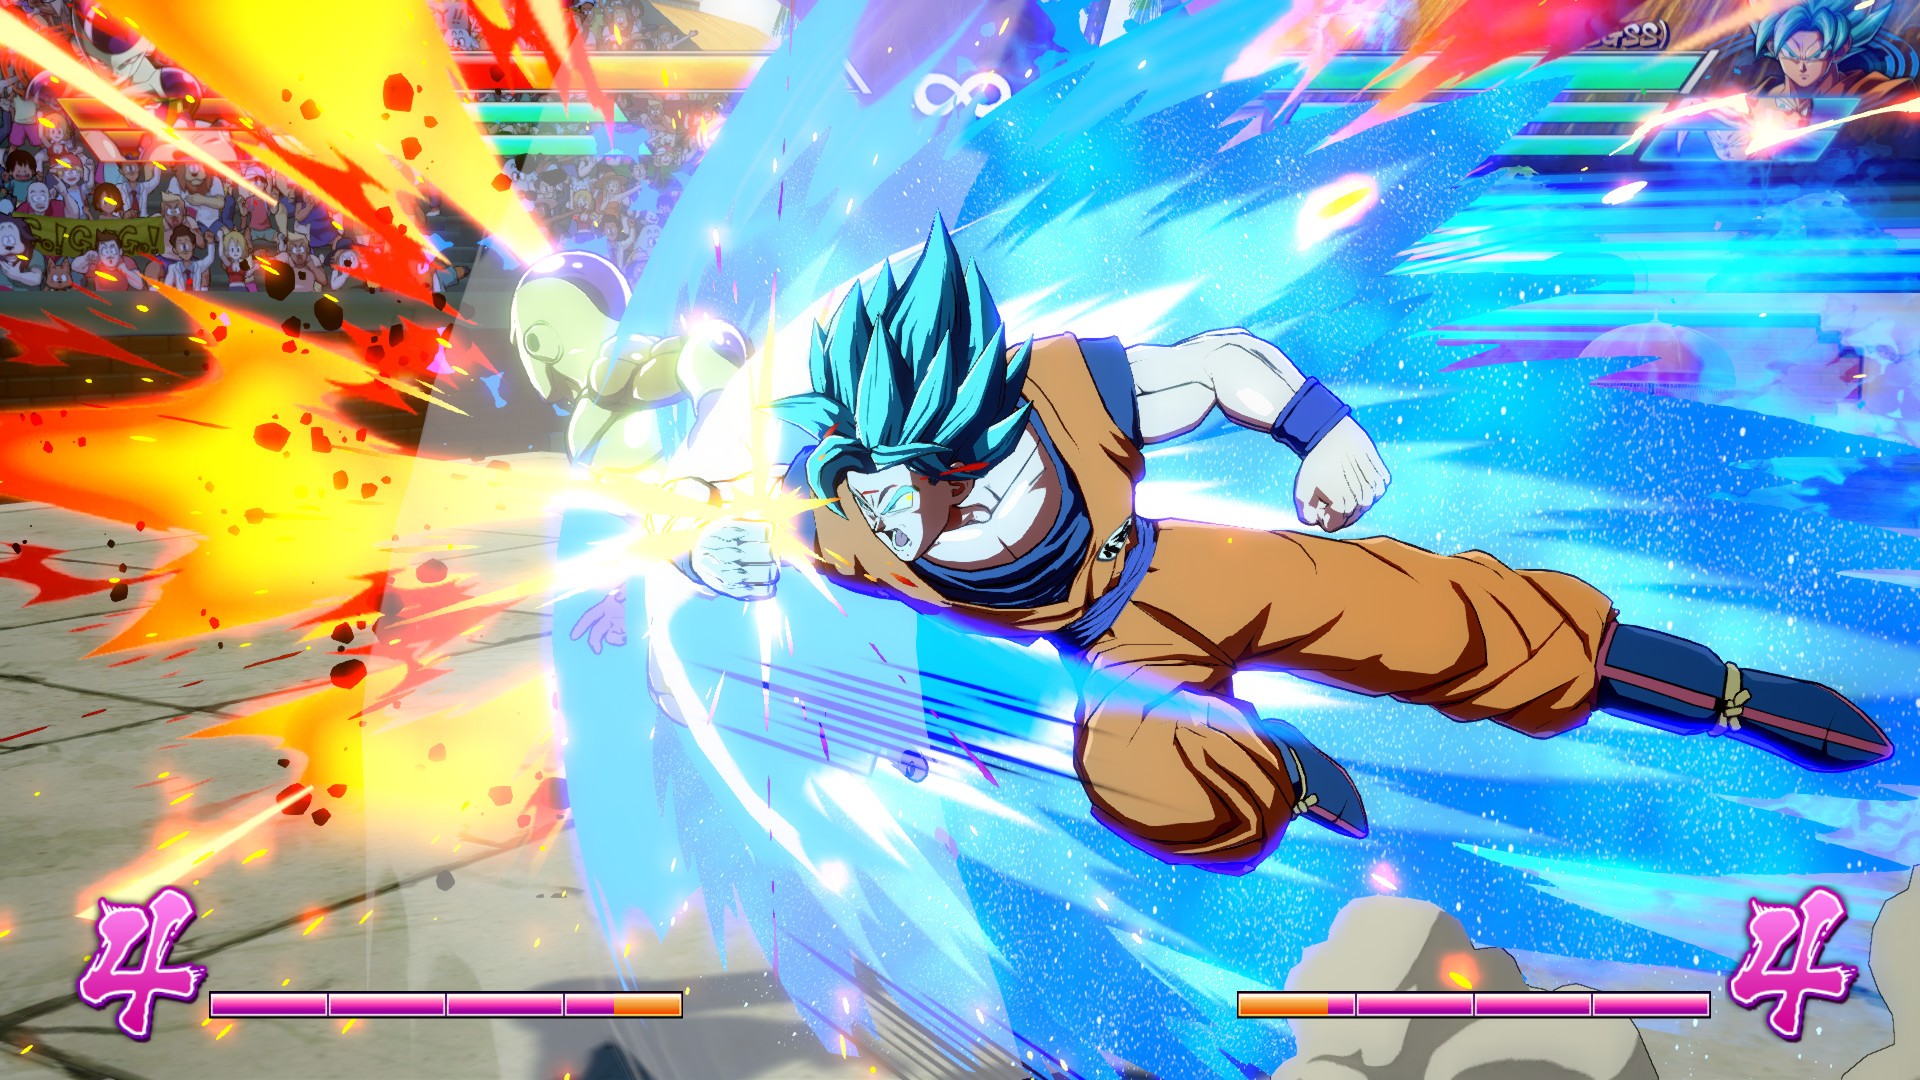 ‘Dragon Ball’ returns with a new game